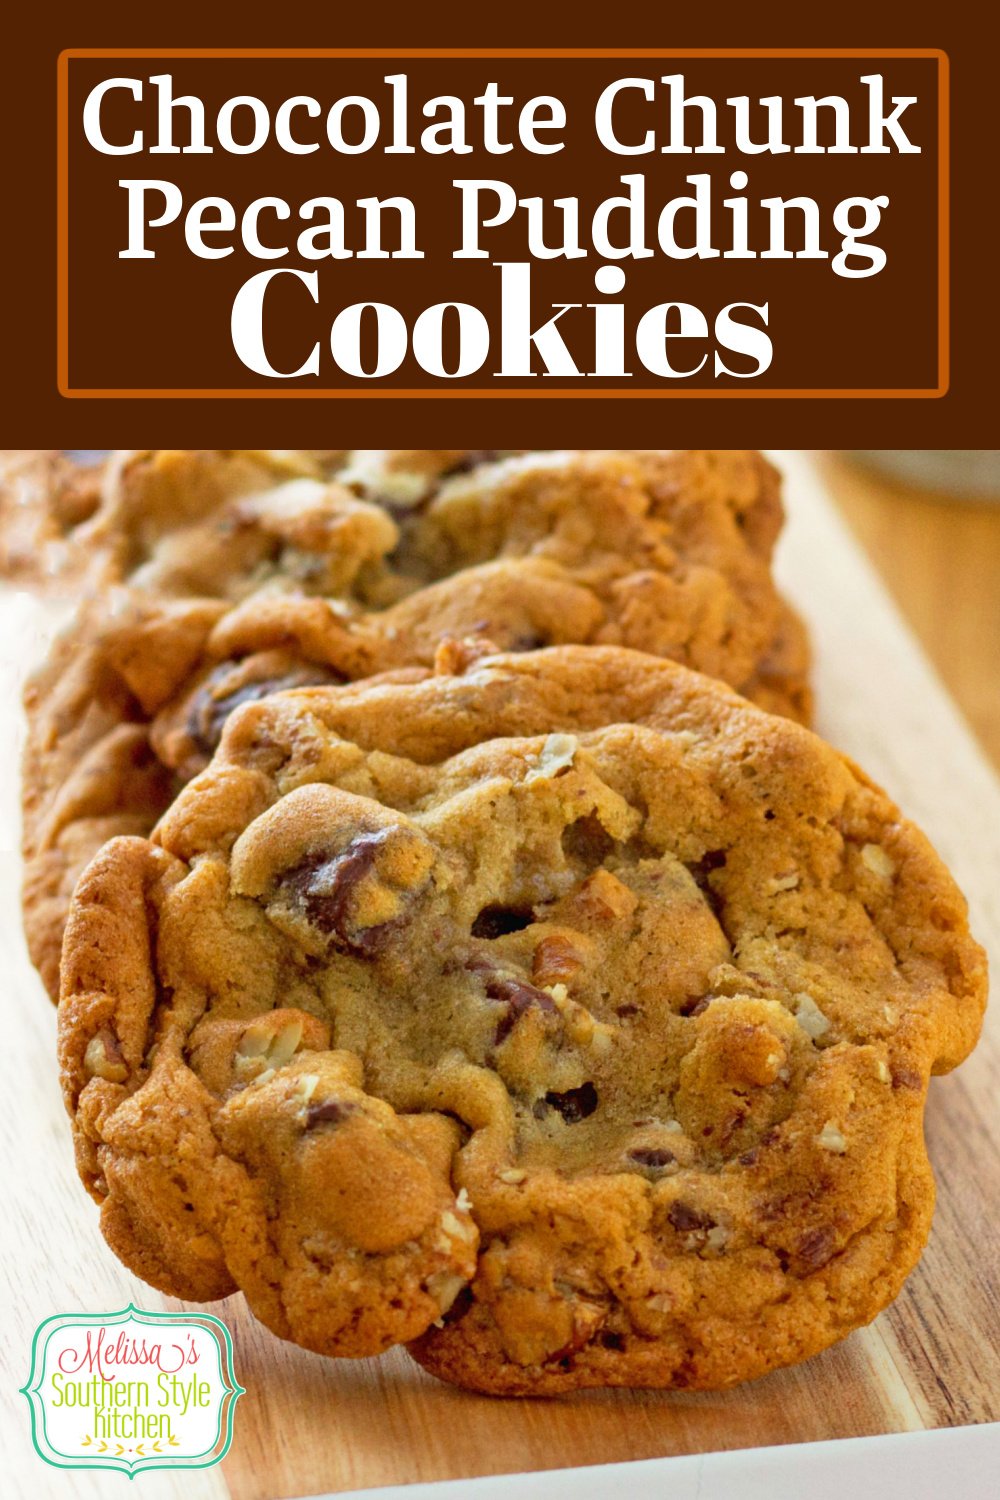 These Chocolate Chunk Pecan Pudding Cookies won't last long in your cookie jar #chocolatechunkcookies #puddingcookies #pecans #cookierecipes #easucookierecipes #chocolate #Christmascookies #chocolatecookies #southernrecipes via @melissasssk